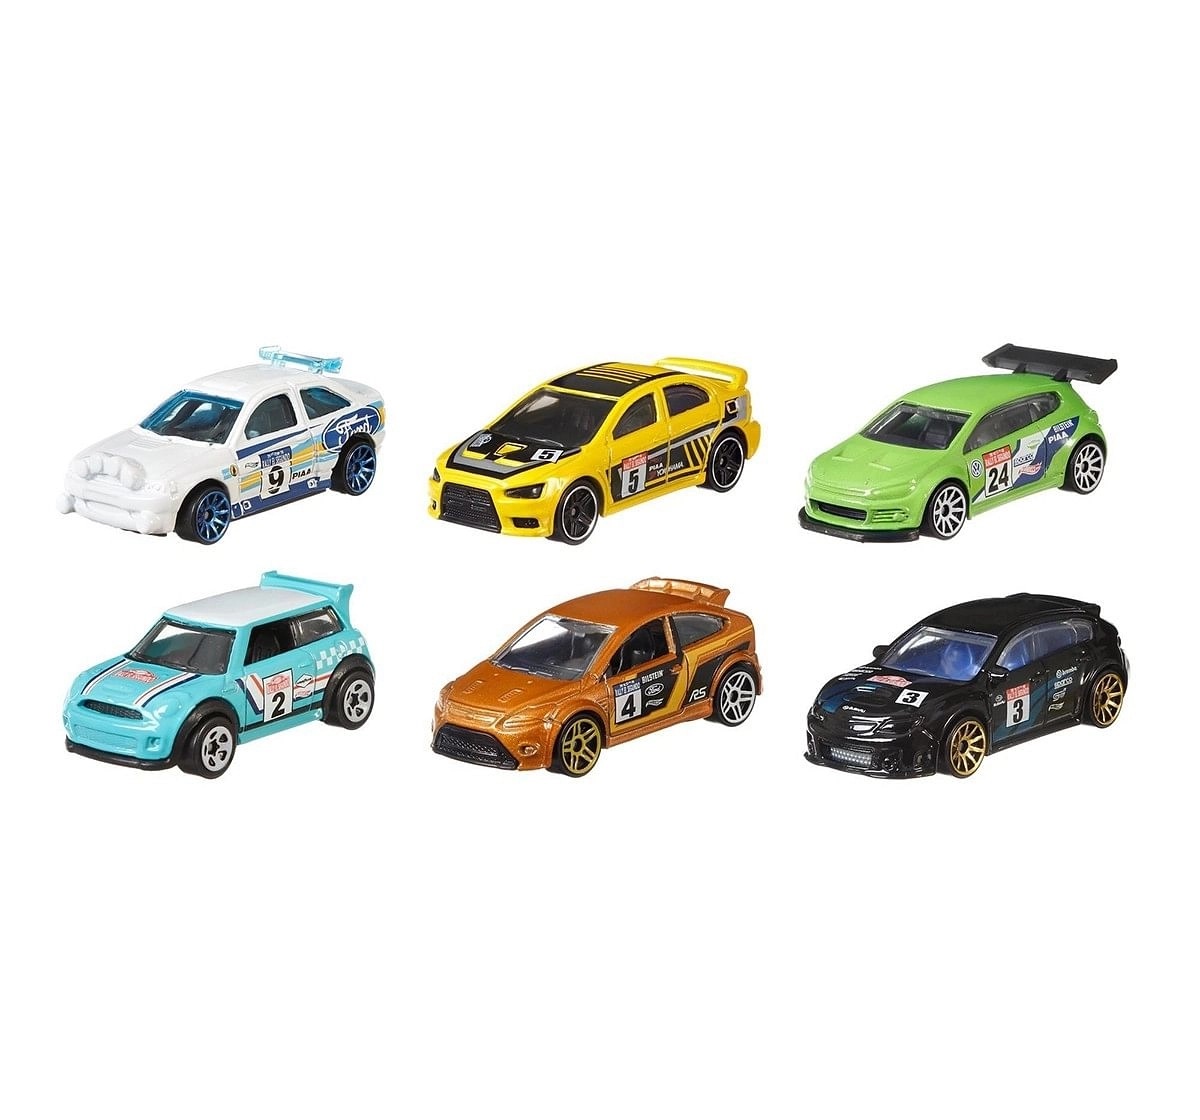 Hot Wheels Themed Automotive Vehicles for Boys age 3Y+, Assorted